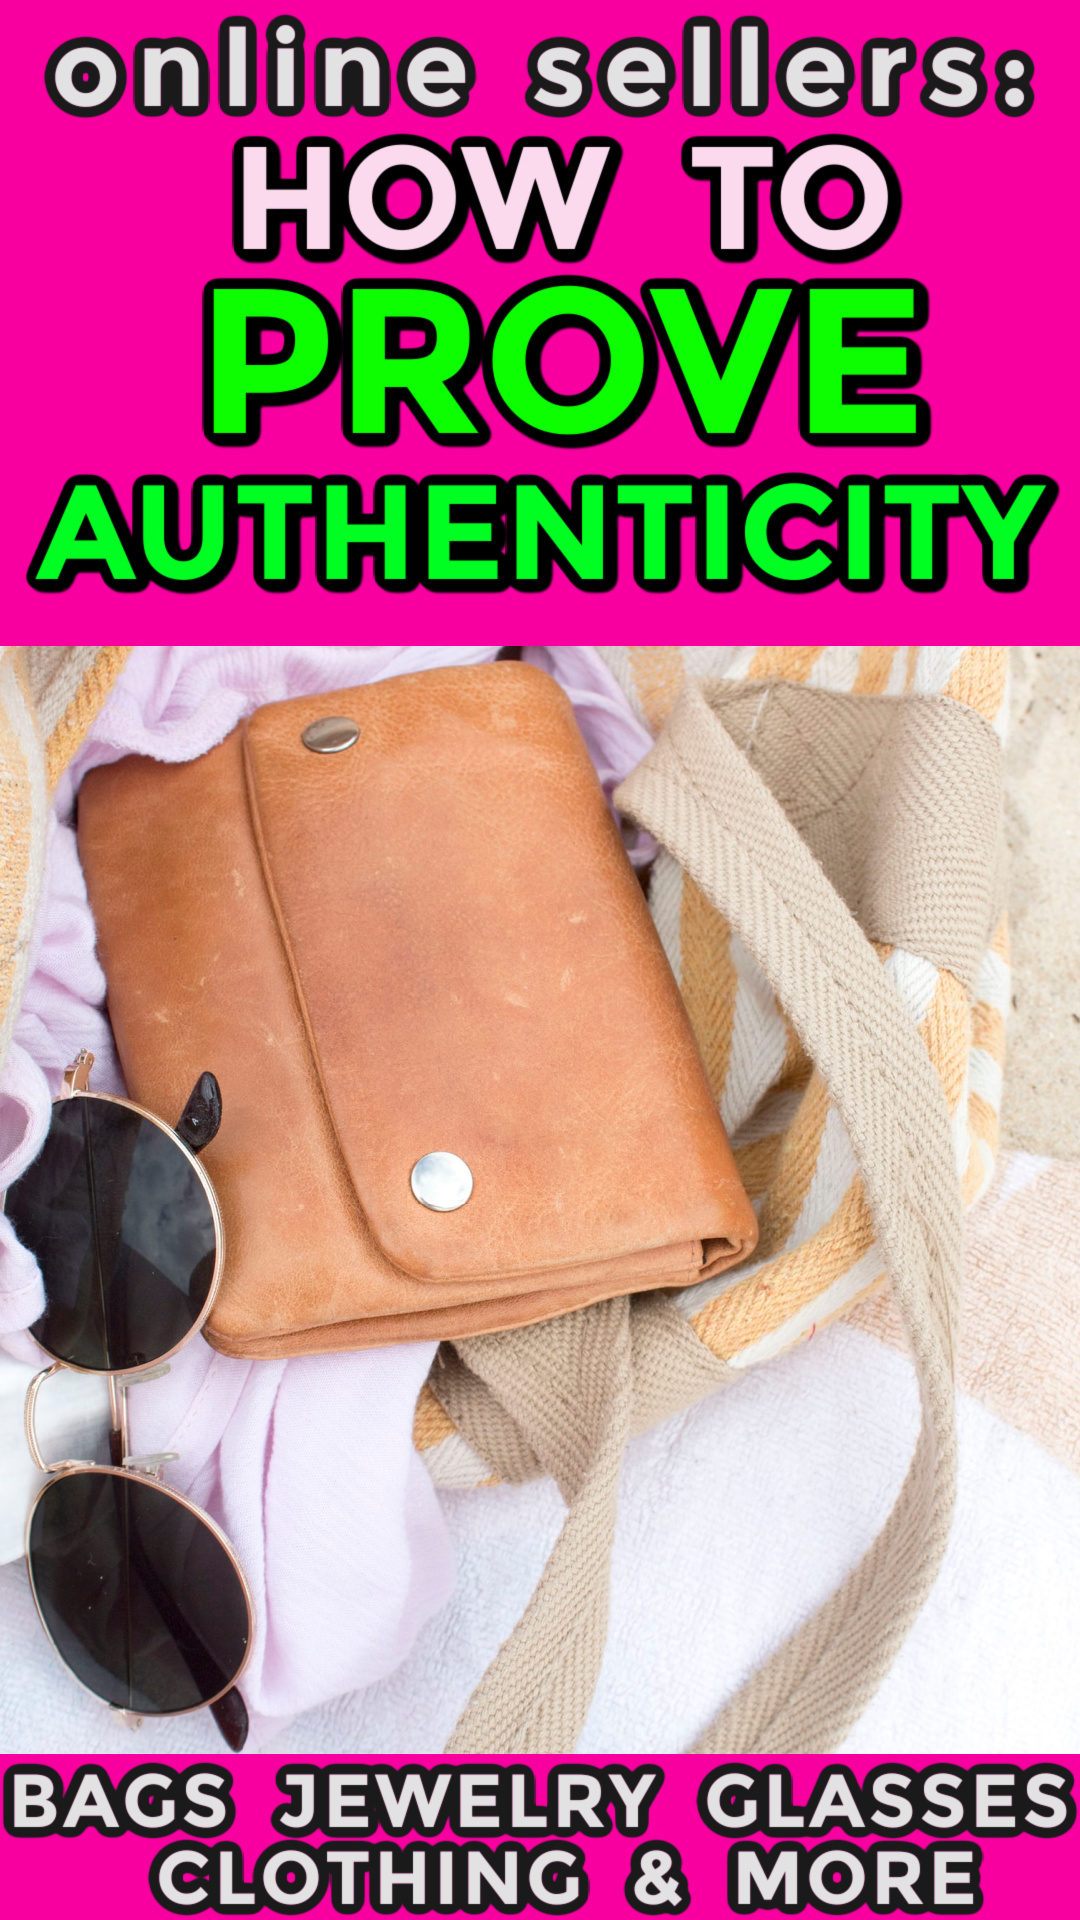 5 Easy Ways! How to Prove a CLOTHING Item is Authentic When Buyer